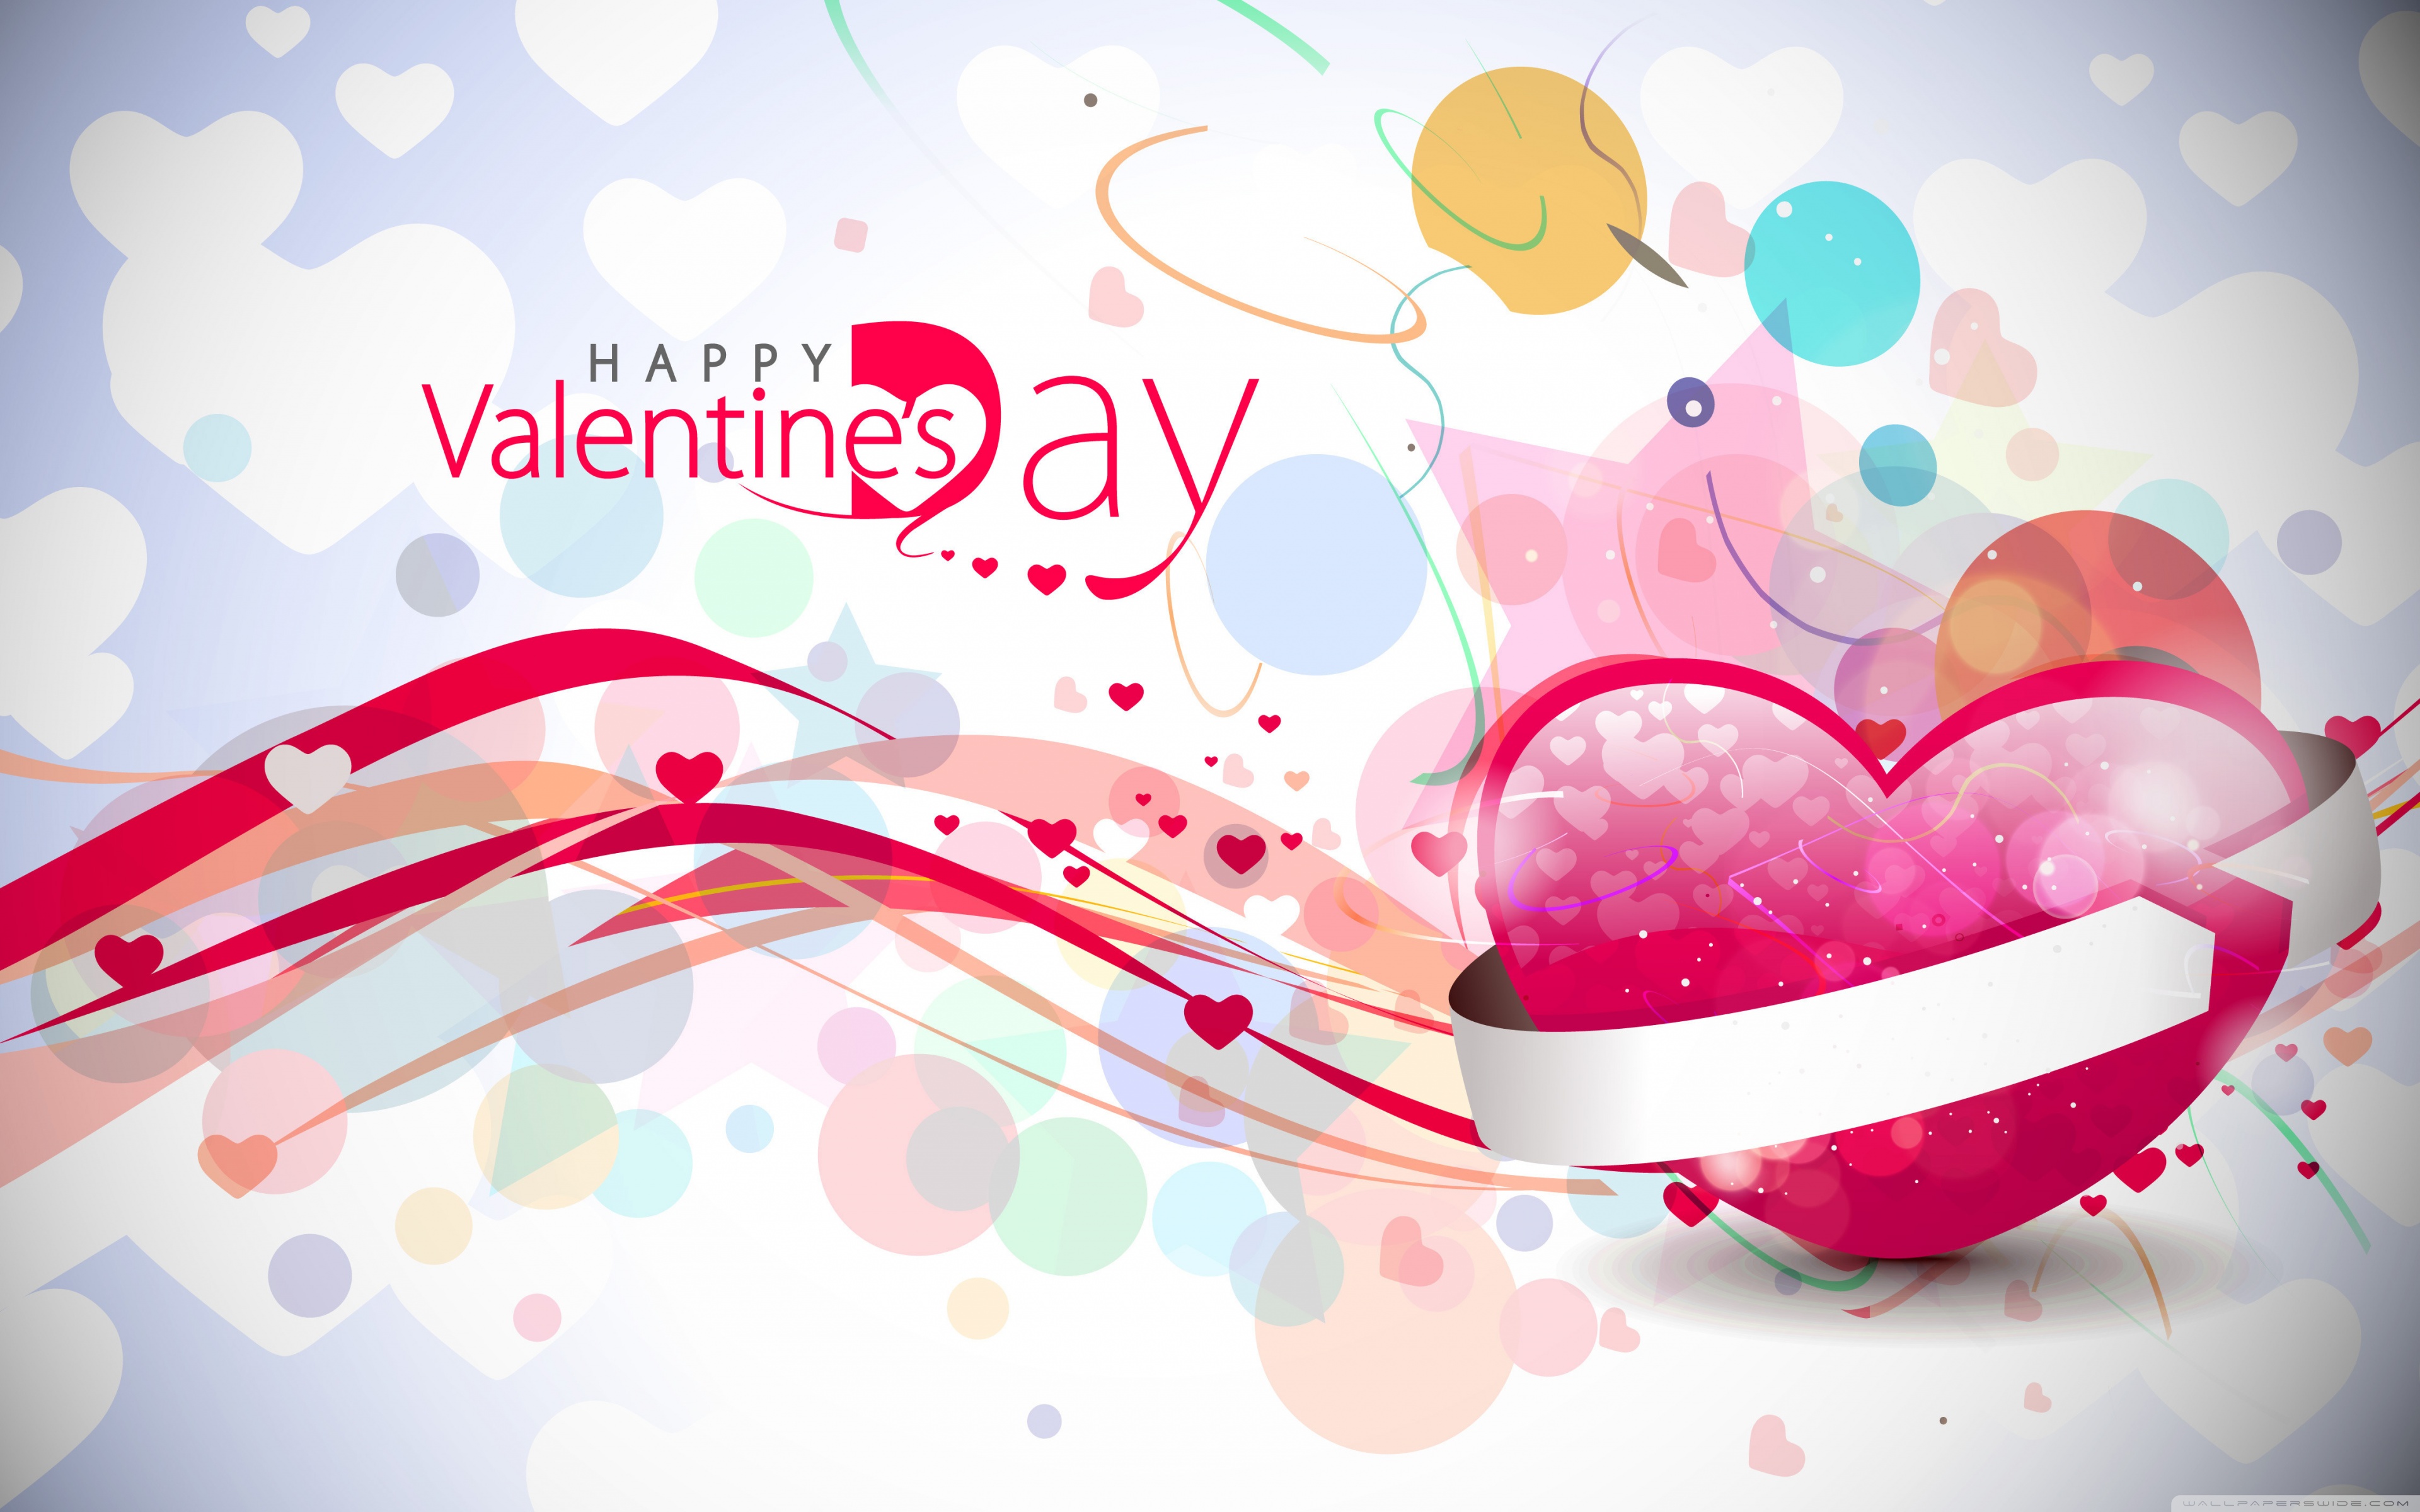 Download Wallpaper Friendly And Colourful Wallpaper - Feb 14 Valentine Day - HD Wallpaper 